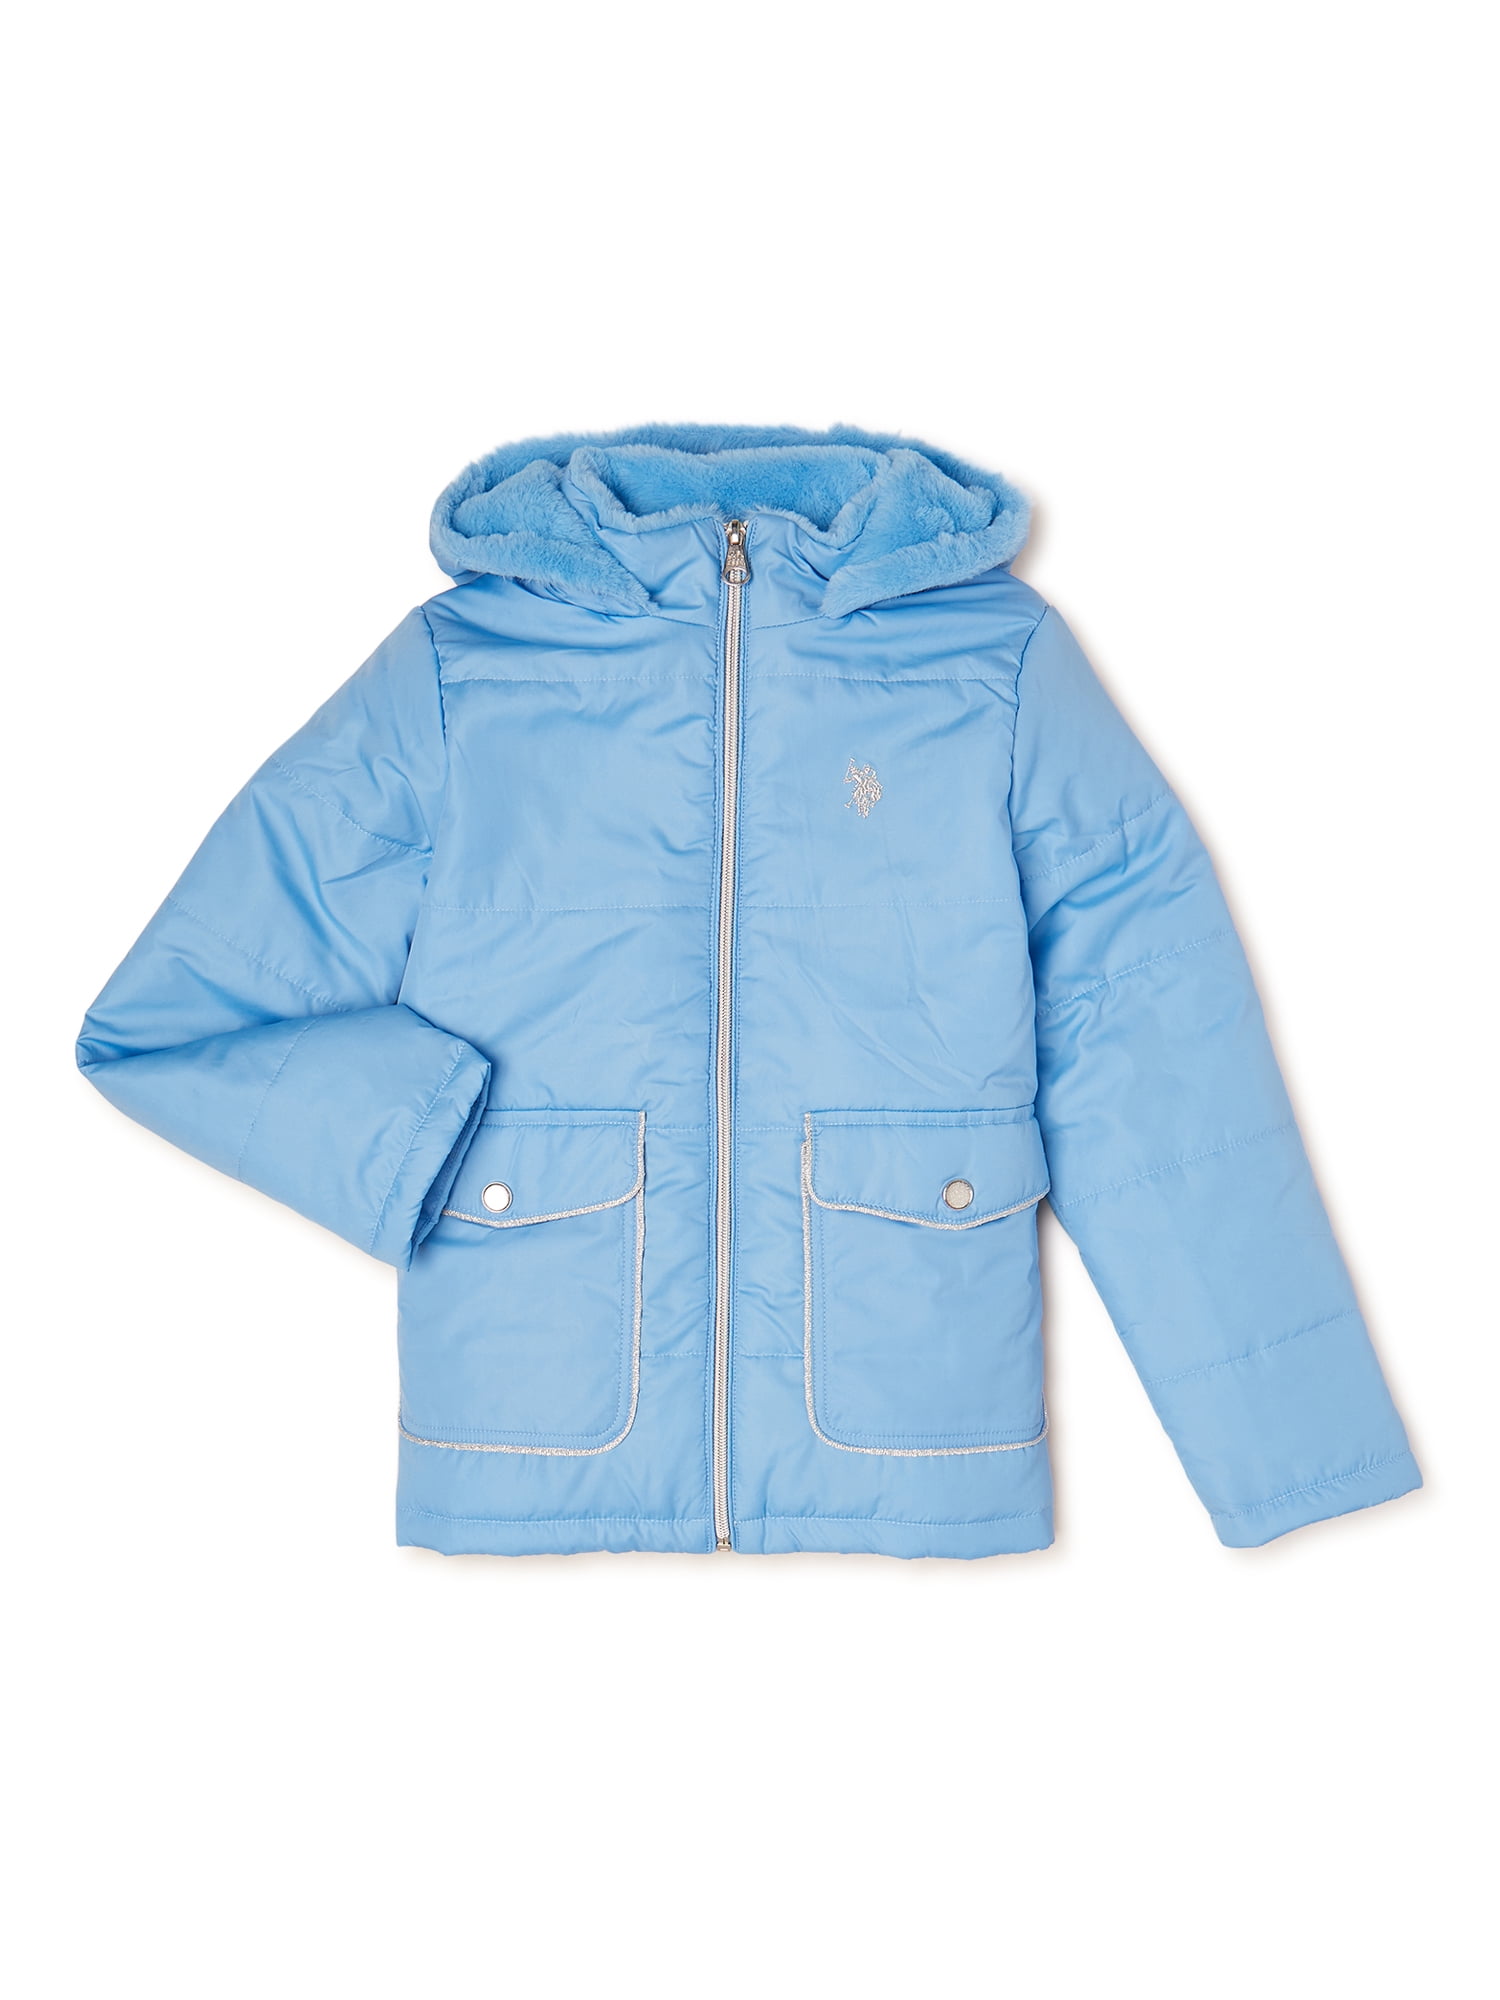 U.S girls Hooded Bubble Jacket With Piping Detail Polo Assn